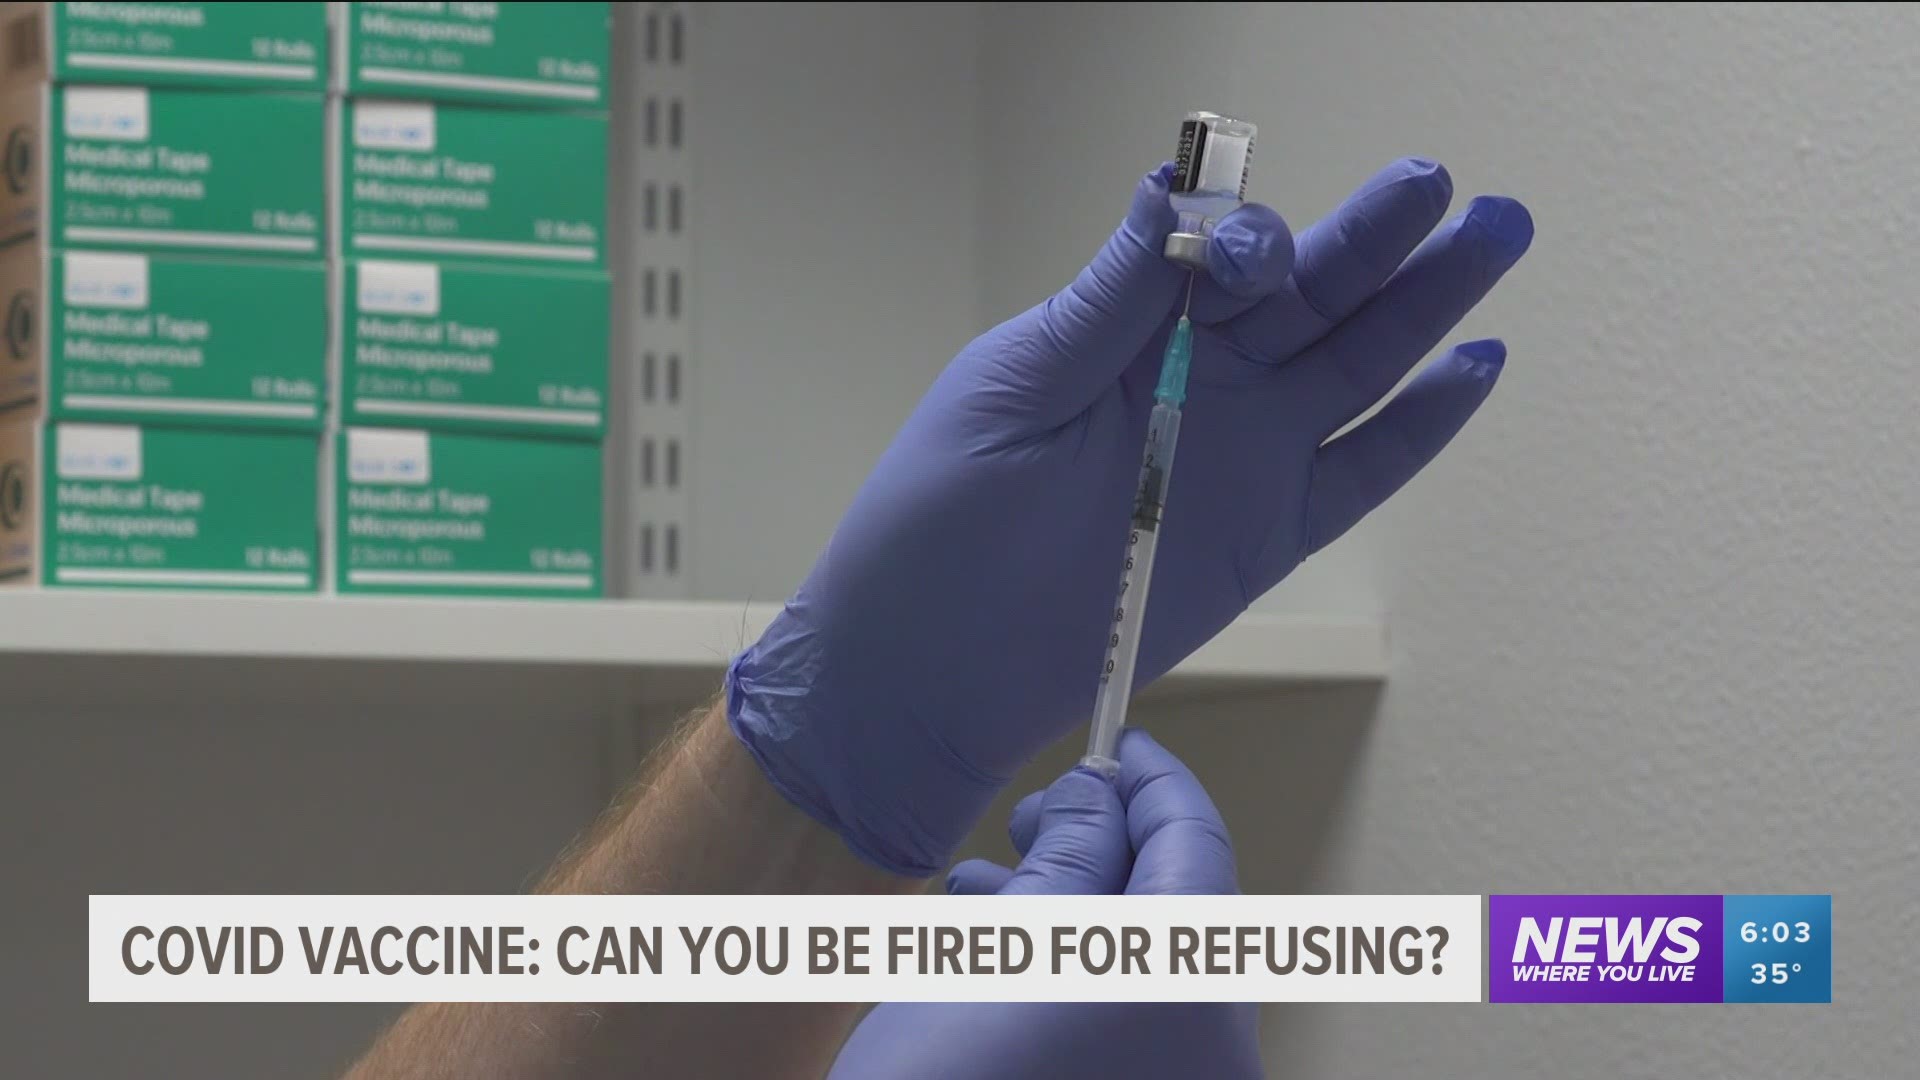 Once the vaccine is rolled out to the general public some companies may require their employees to get it.